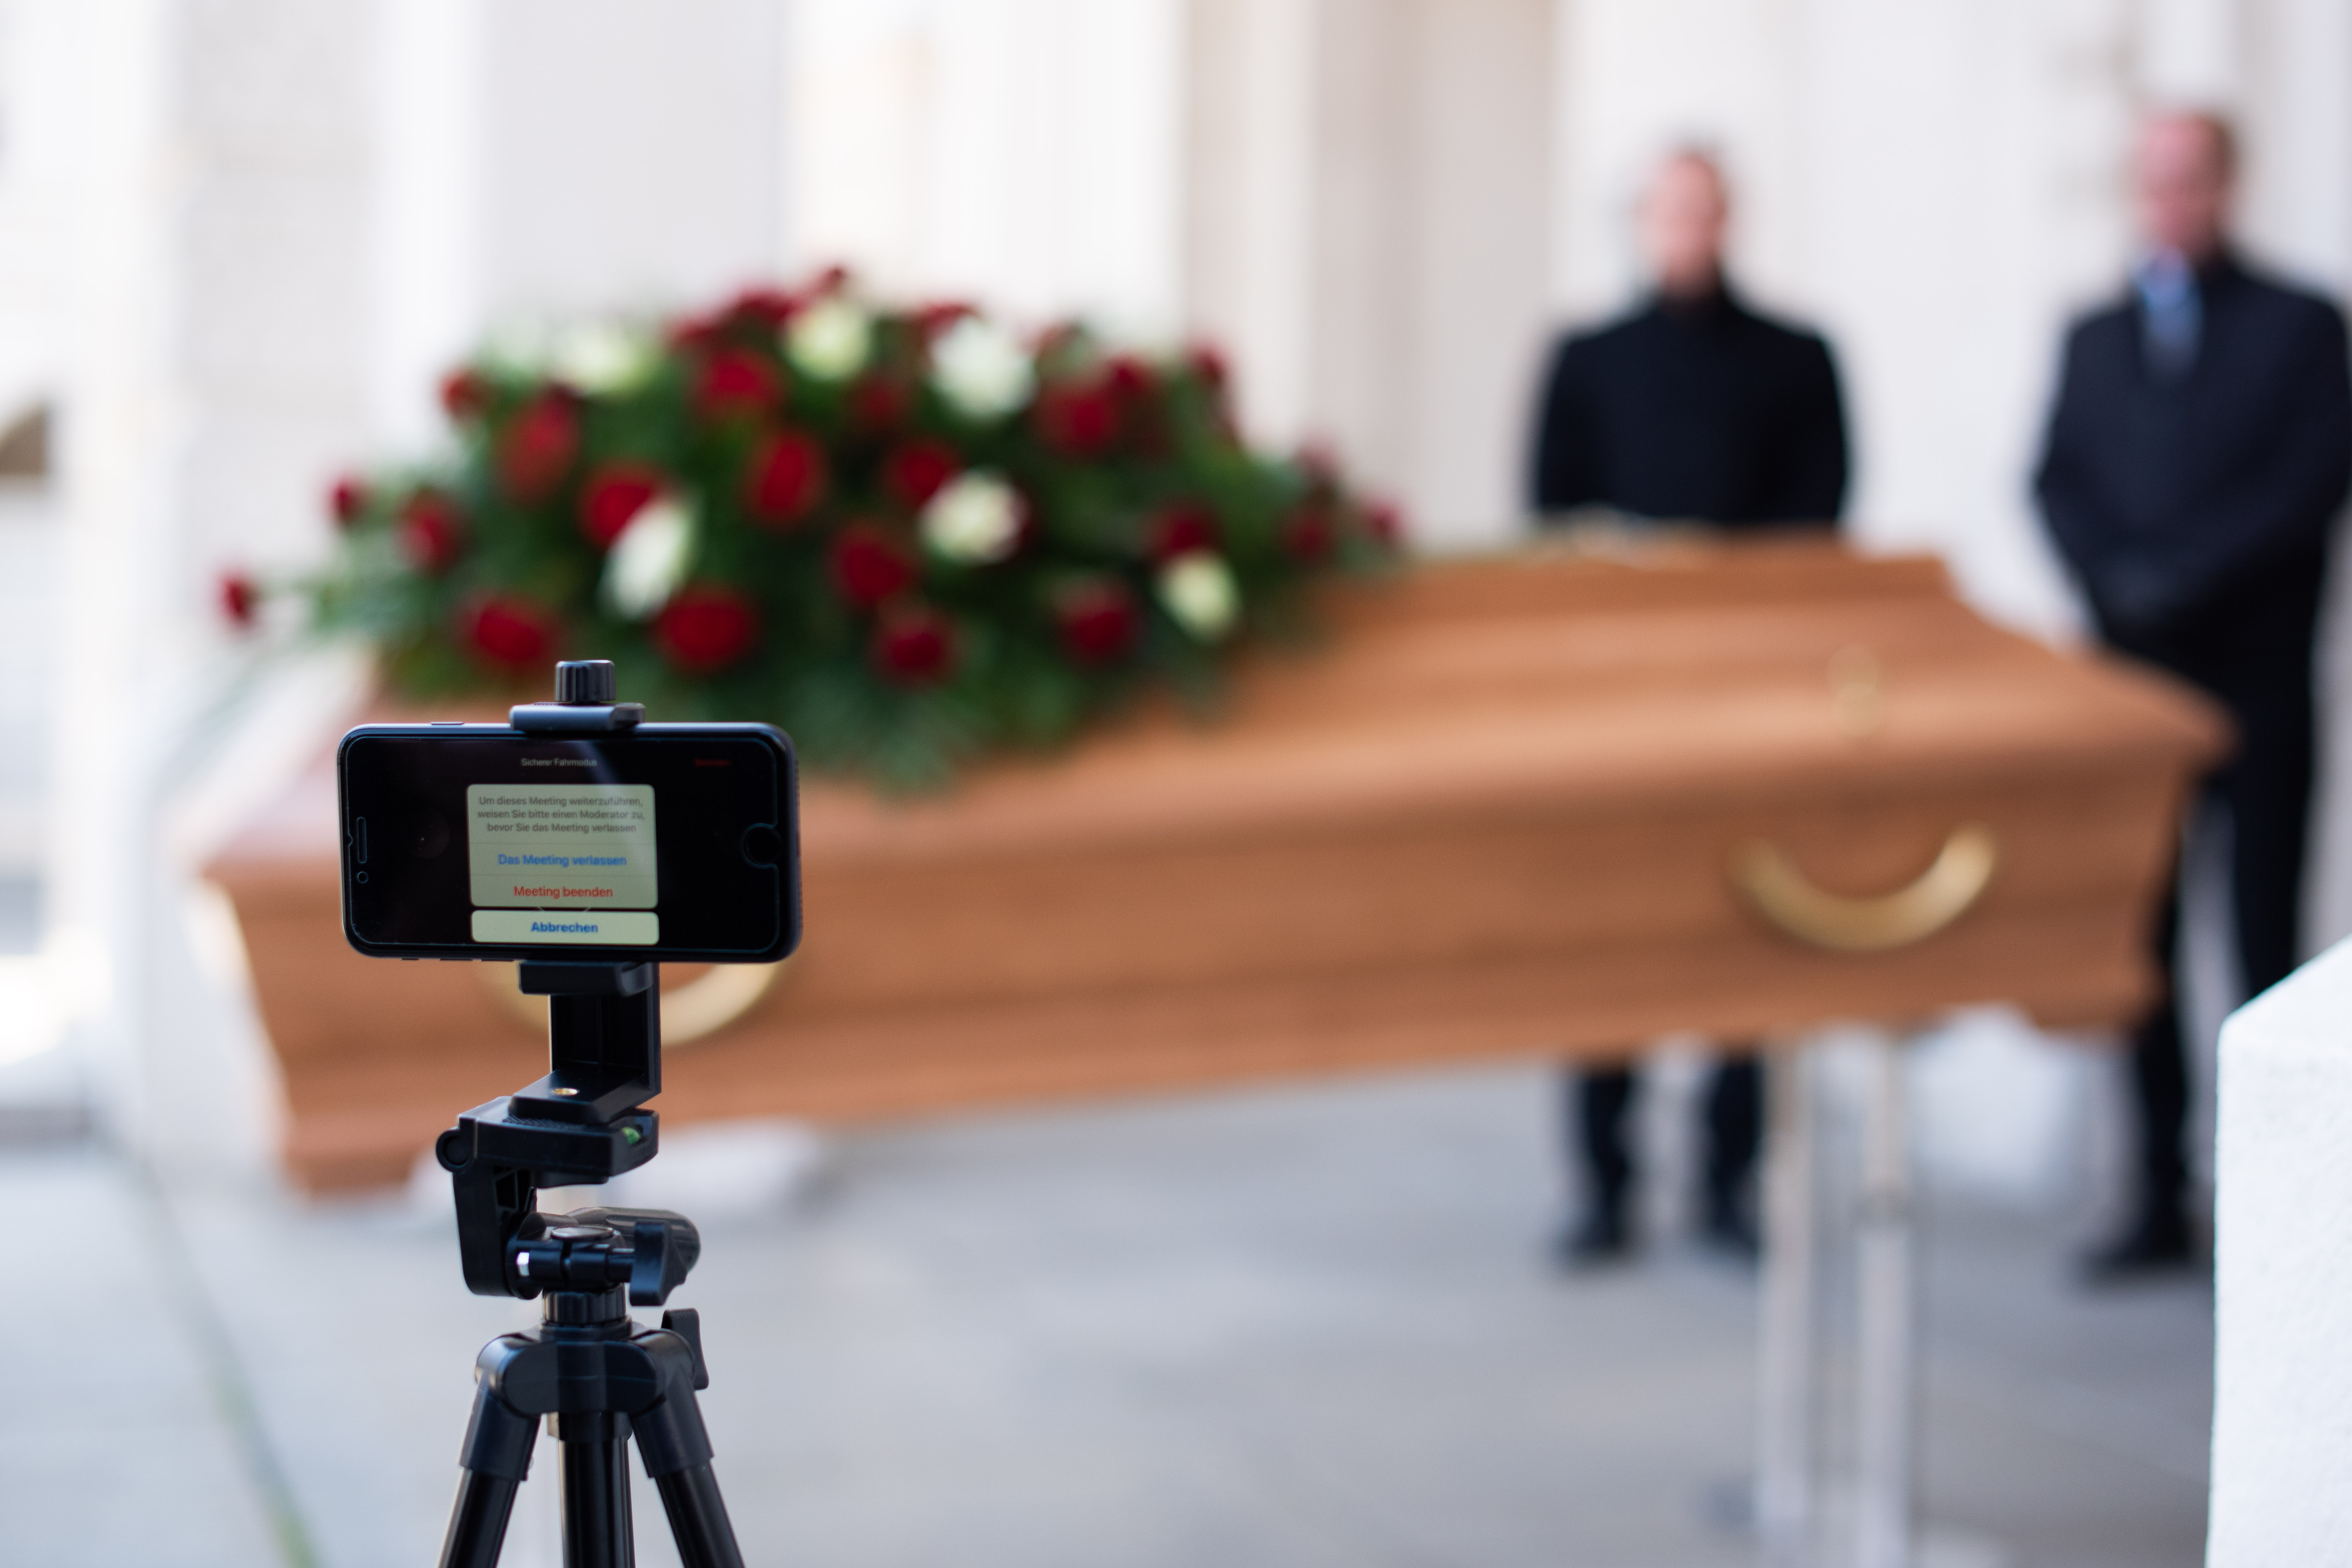 Undertakers Offer Livestreaming For Funerals Following Coronavirus Restrictions